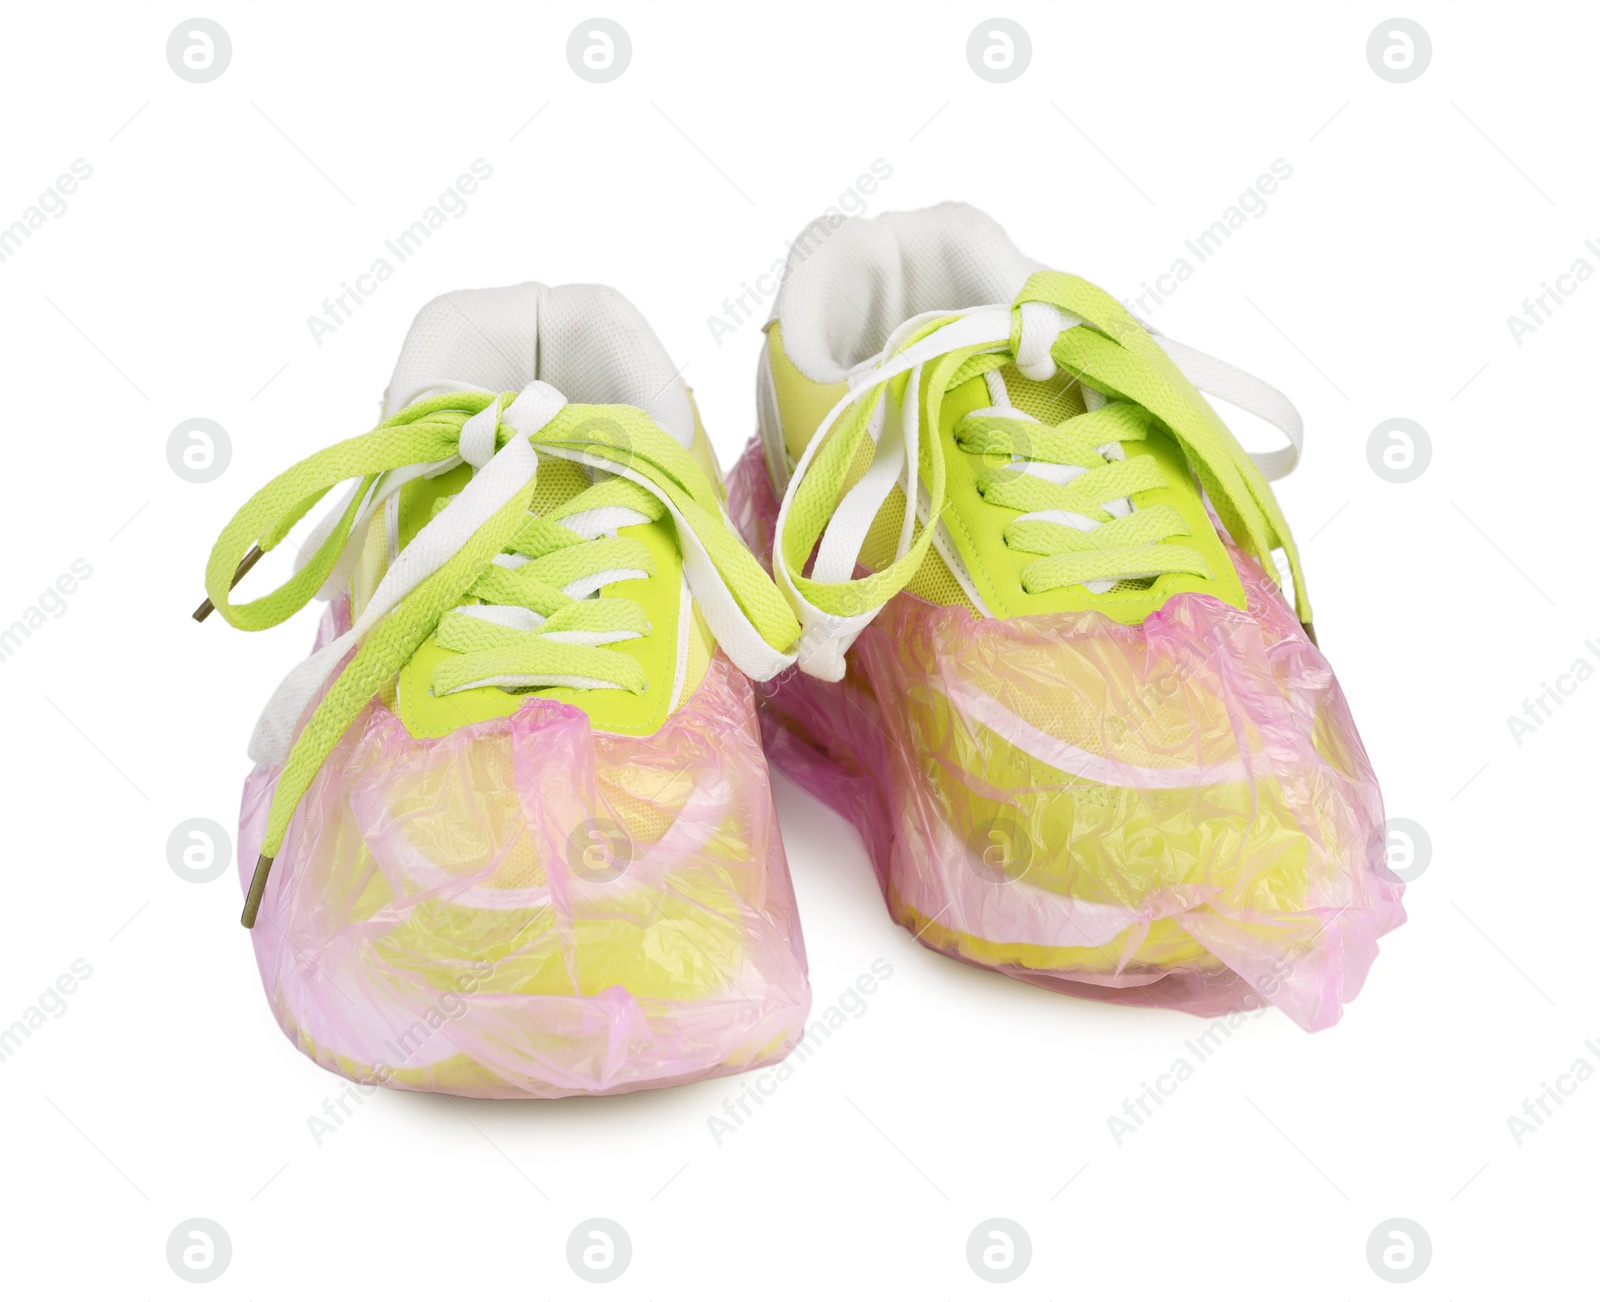 Photo of Sneakers in pink shoe covers isolated on white